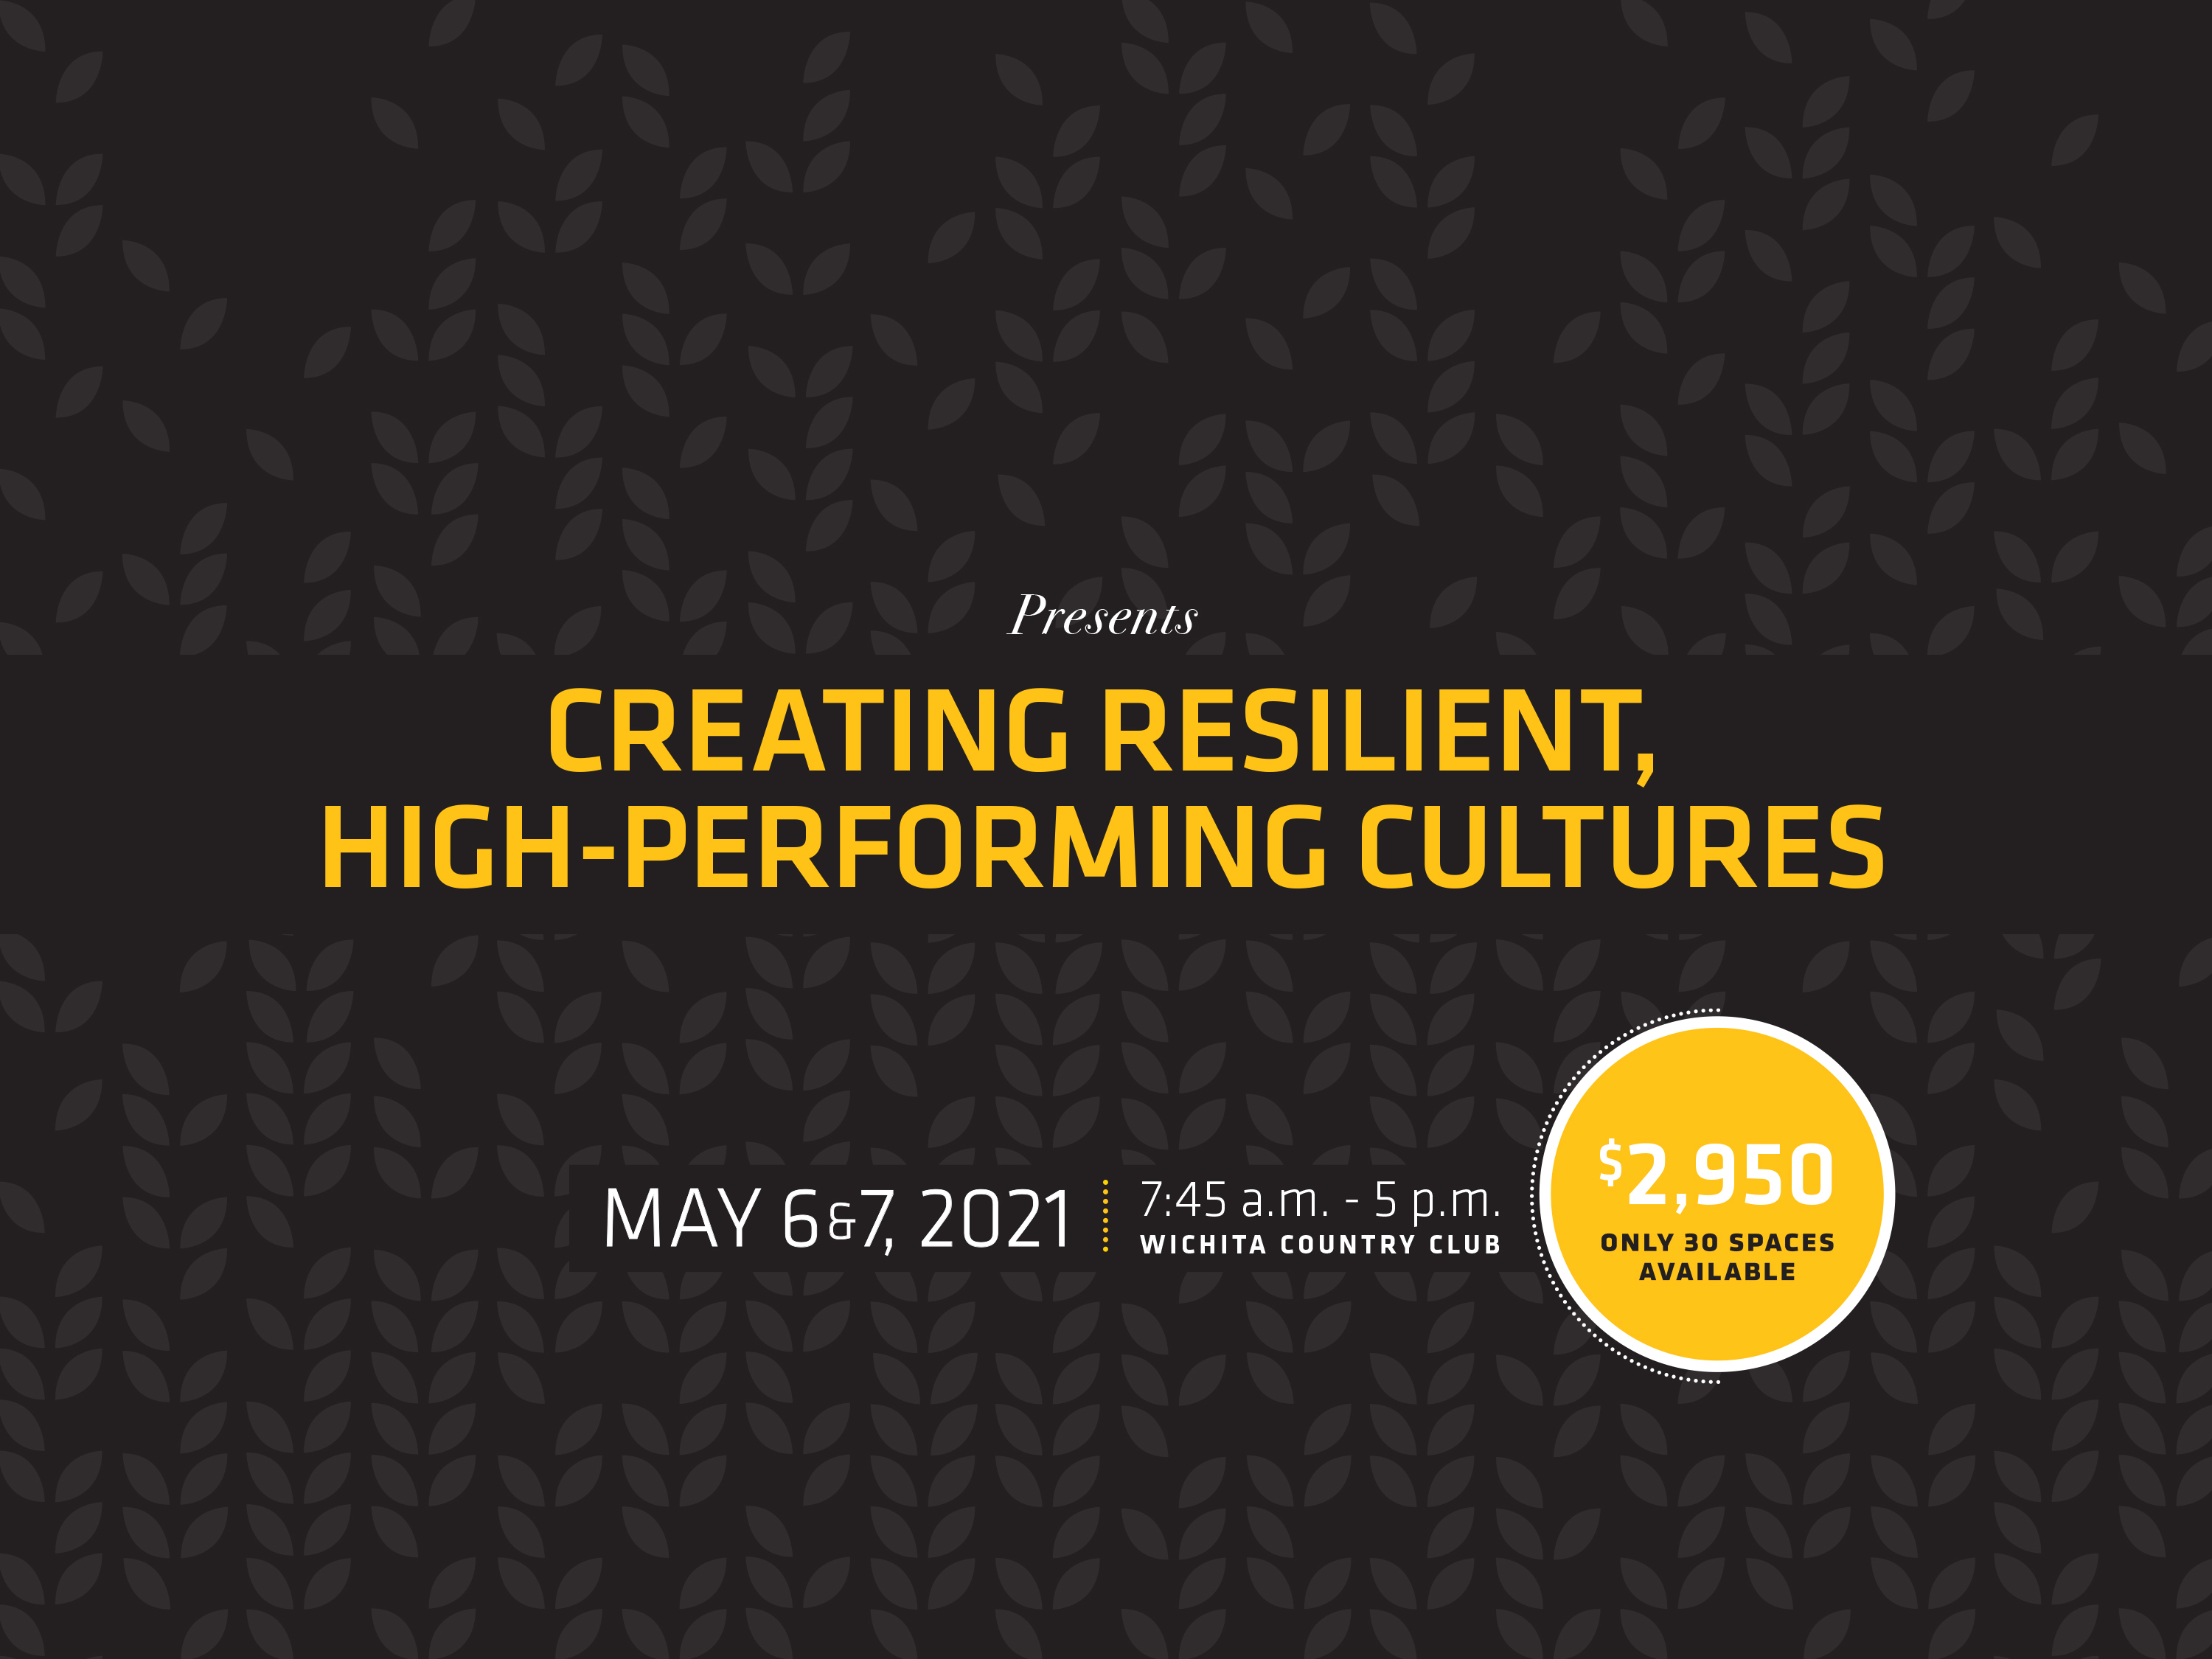 The Barton School of Business Executive Education Program presents Creating Resilient, High-Performing Cultures, 7:45a – 5p, May 6 and 7, Wichita Country Club. $2,950. Only 30 spaces available 